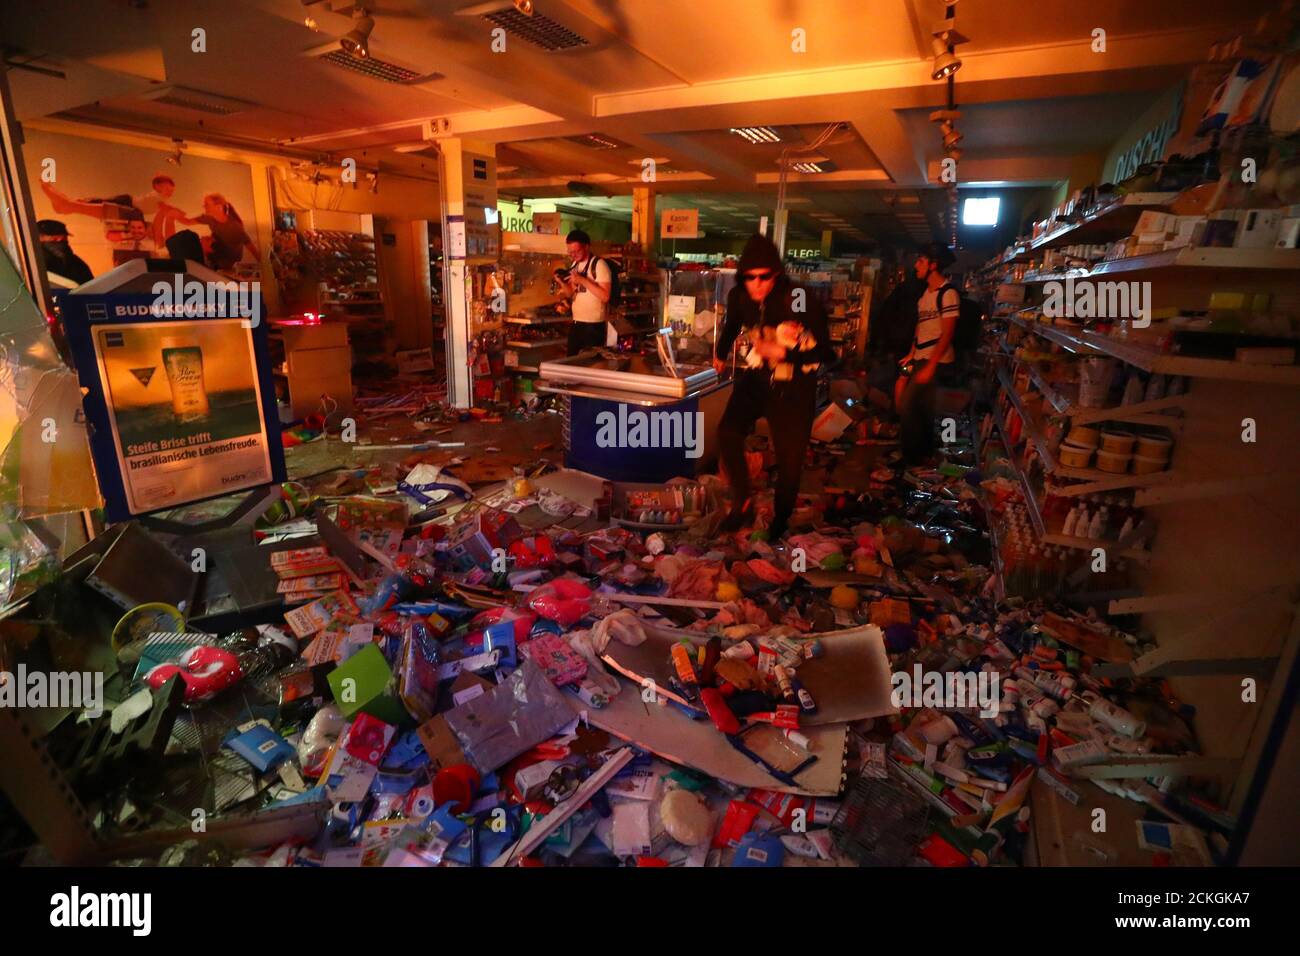 A shop is looted during anti-G20 protests on the first day of the G20 summit in Hamburg, Germany, July 7, 2017. REUTERS/Pawel Kopczynski Stock Photo